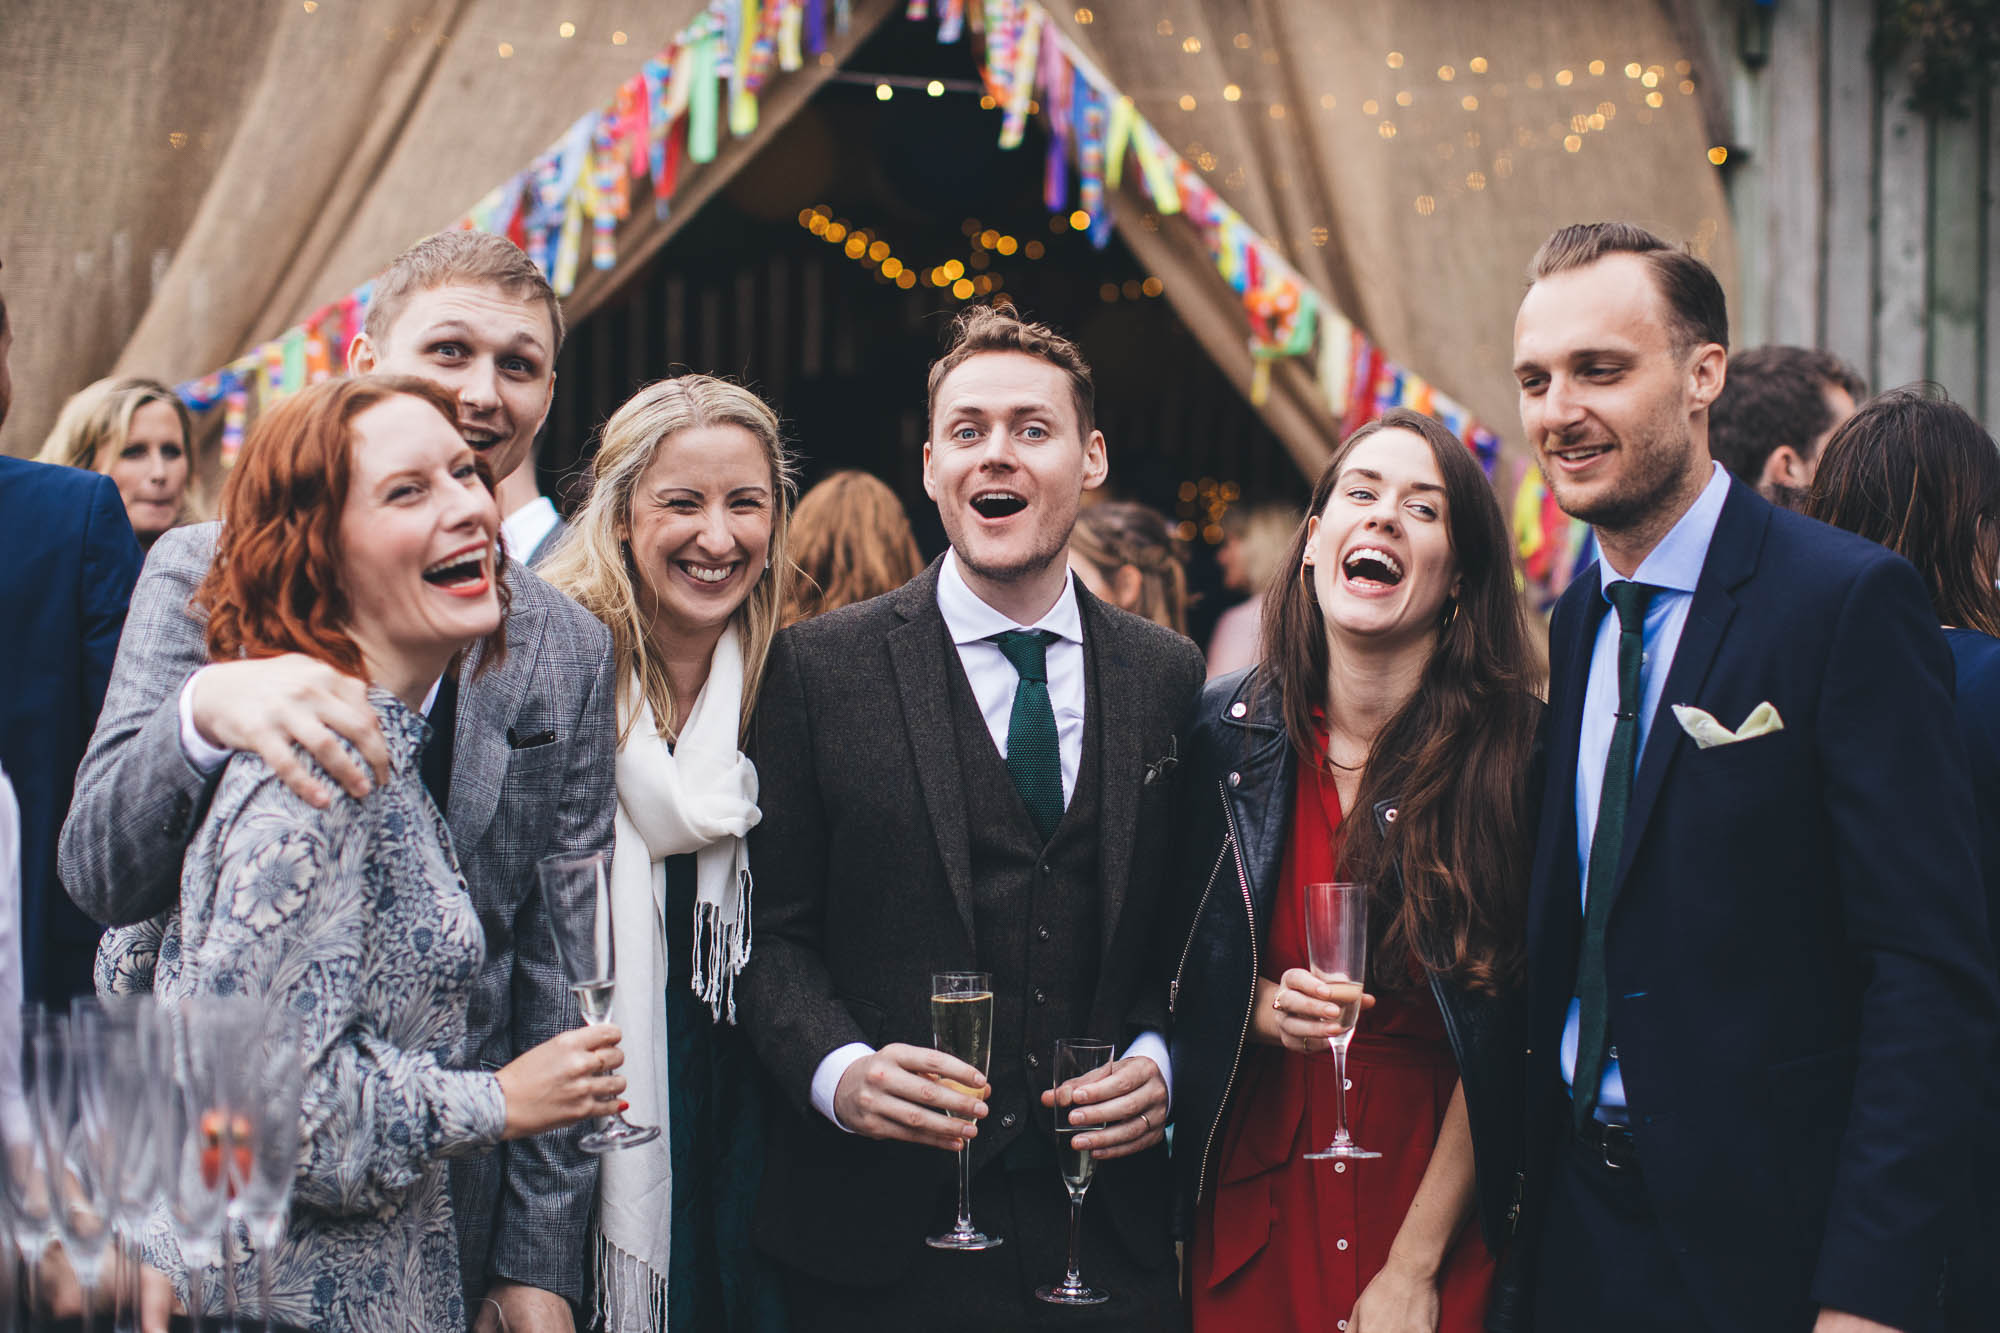 wedding guests laugh together